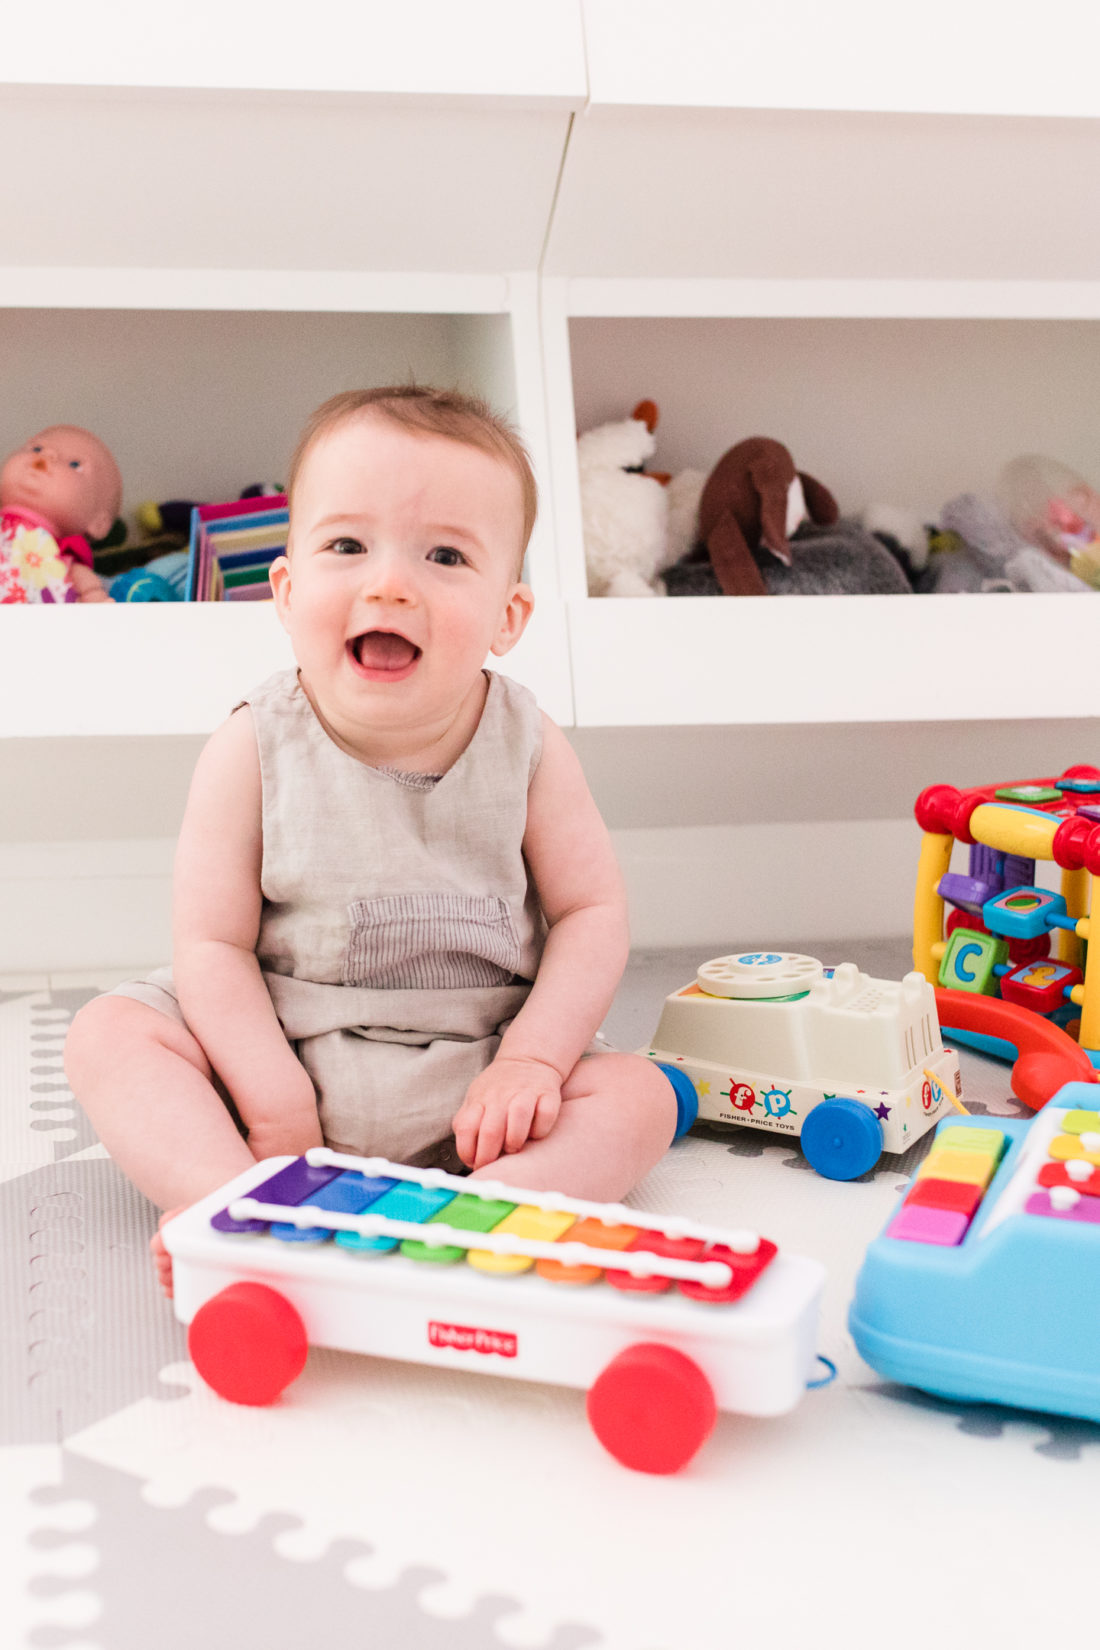 Eight month old Major Martino sits among his colorful toys at home in Connecticut